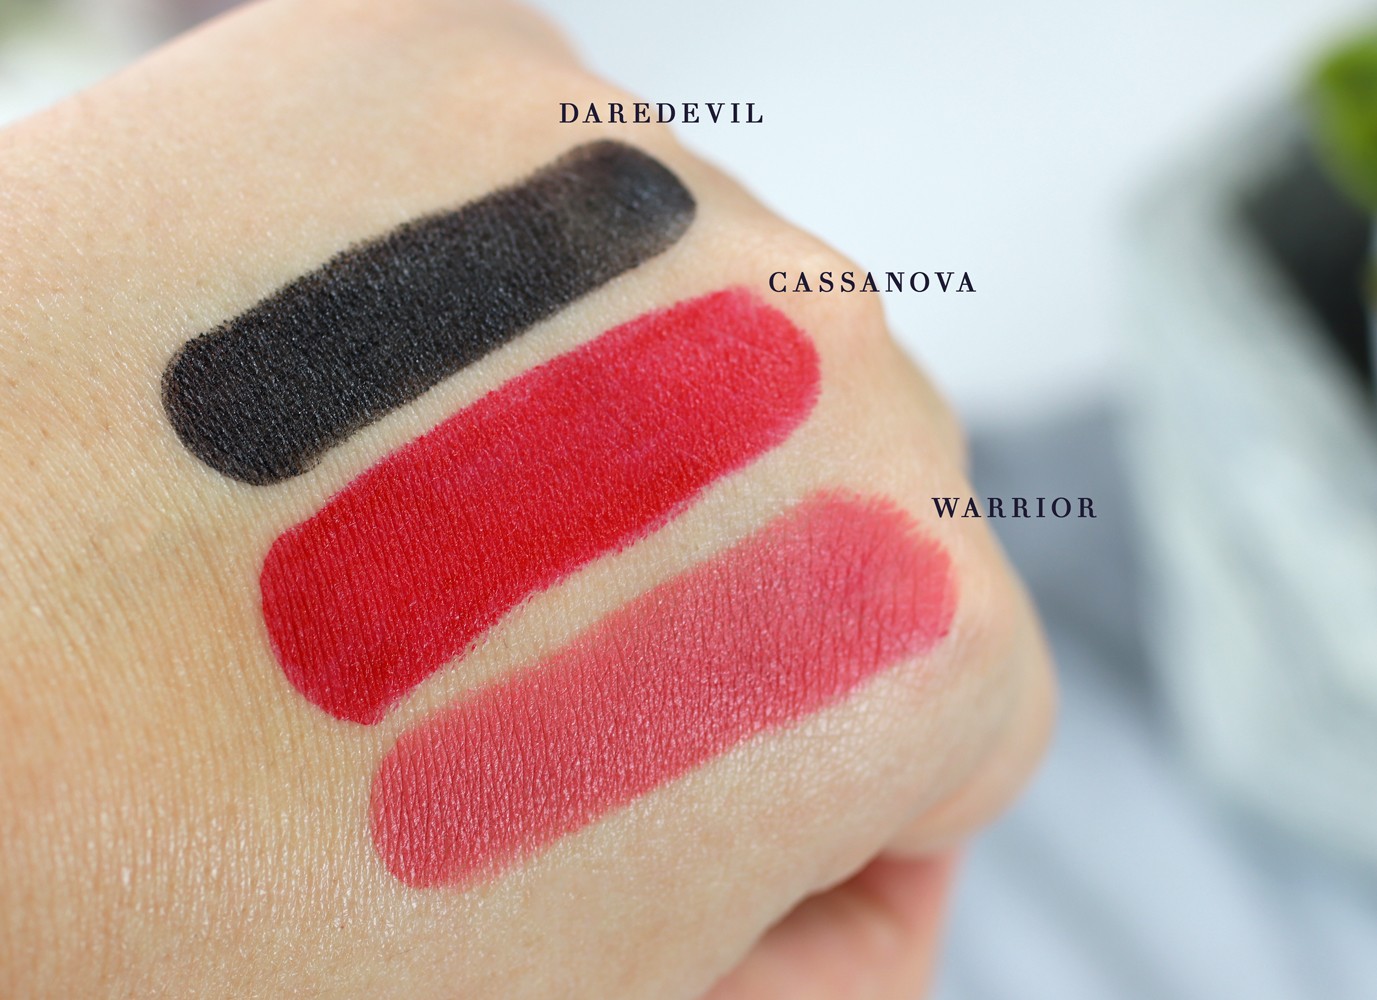 Luscious Cosmetics Heartbreaker Creamy Matte Lipstick Swatches - Luscious Cosmetics Review and Try On by popular LA cruelty free beauty blogger My Beauty Bunny